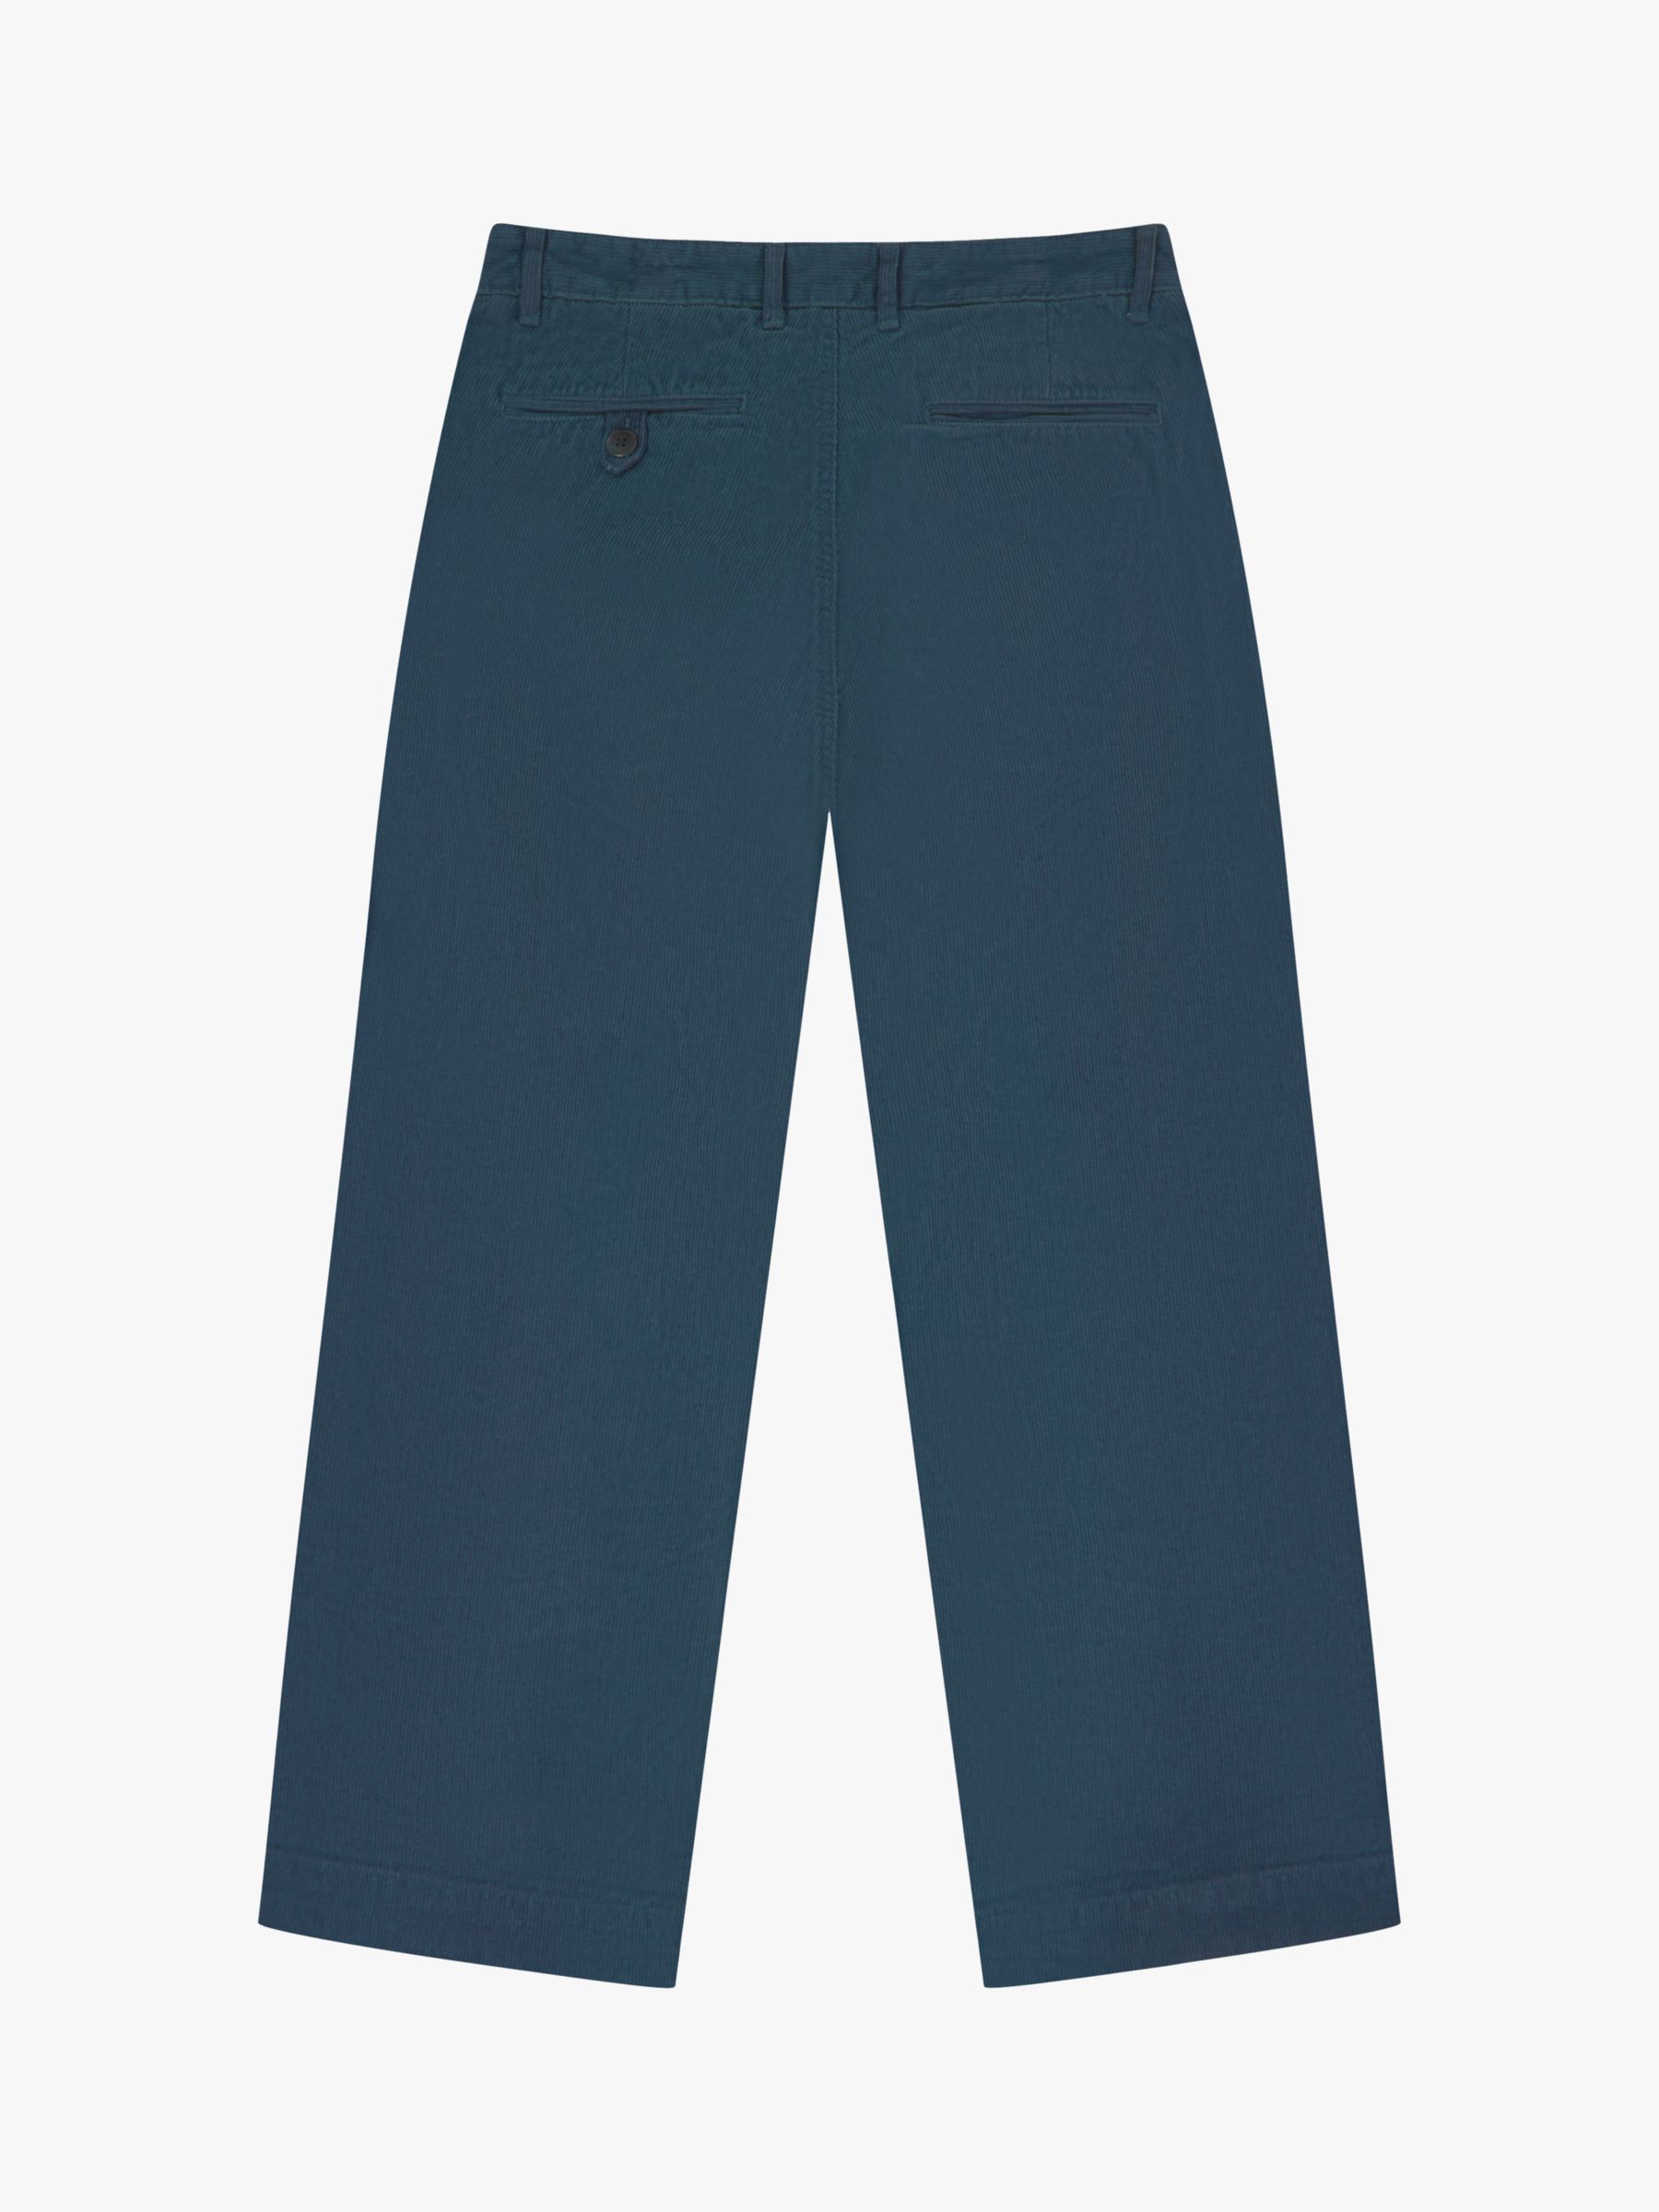 Buy Uskees Retro Boat Trousers, Blue Online at johnlewis.com